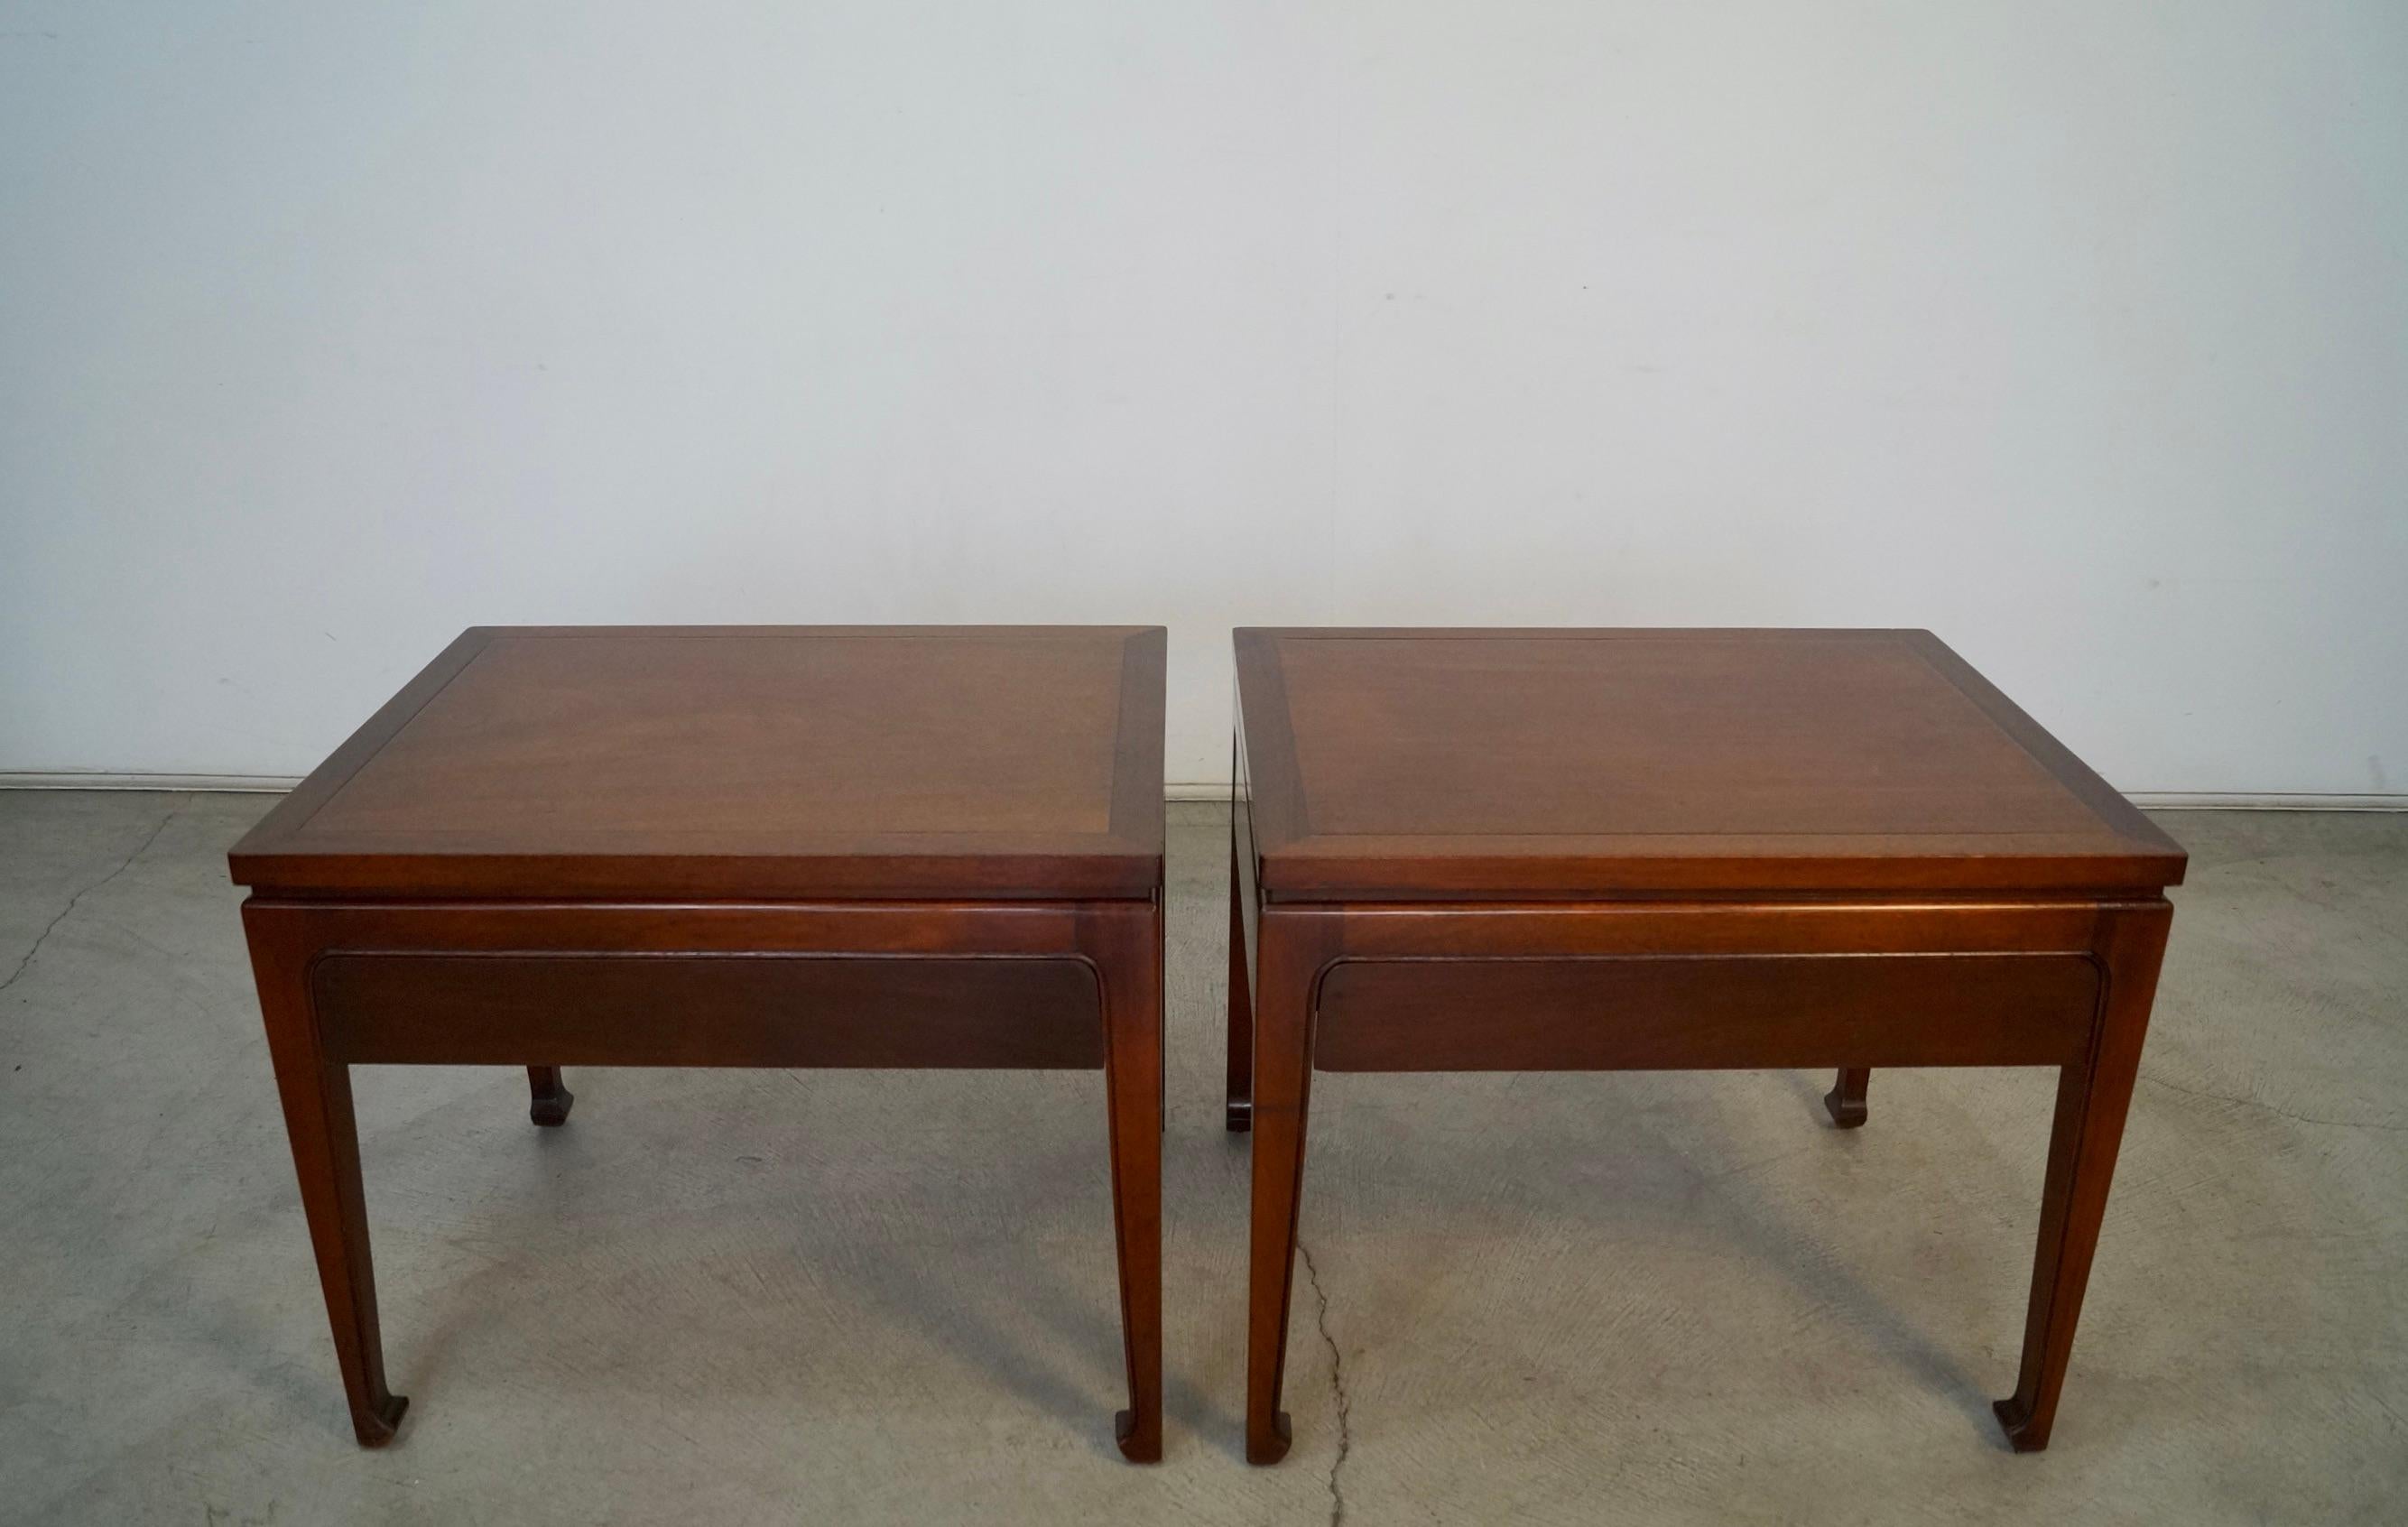 Vintage Midcentury Modern night stands for sale. Manufactured in the 1950's by Fine Arts Furniture, and are in good original condition. They have a clean design with a drawer that pulls out, and a finish on the back. They can divide a space, and can